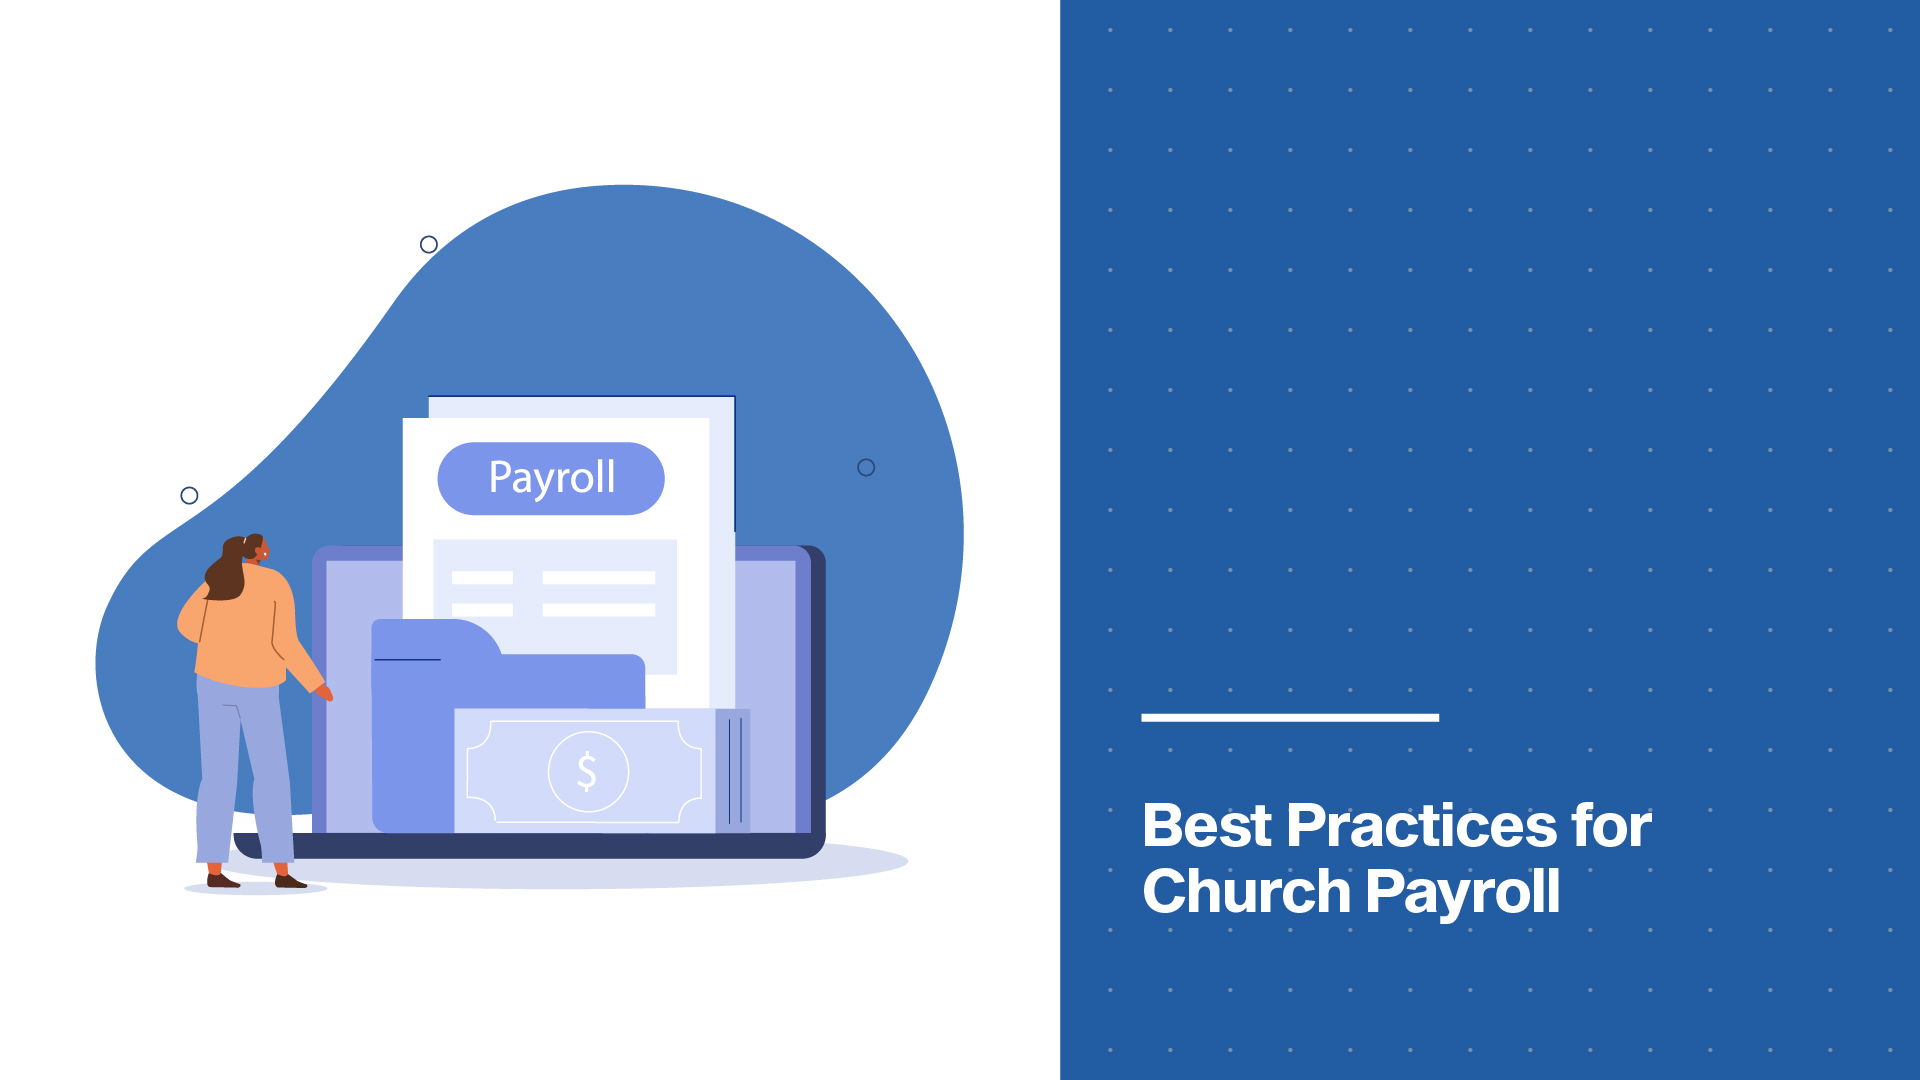 Best Practices for Church Payroll